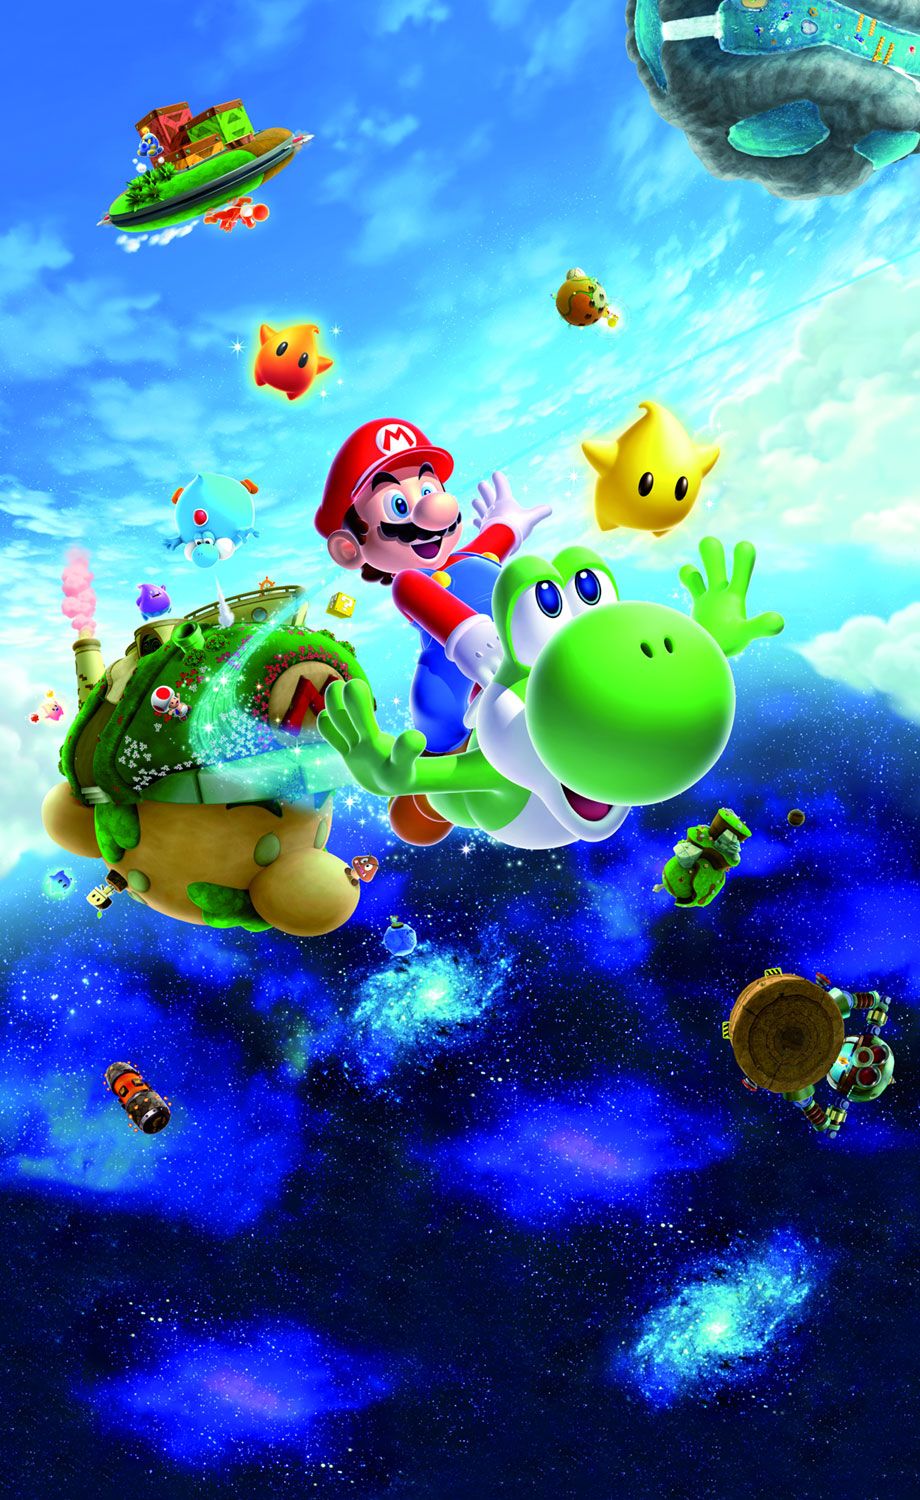 is mario galaxy 2 coming to switch